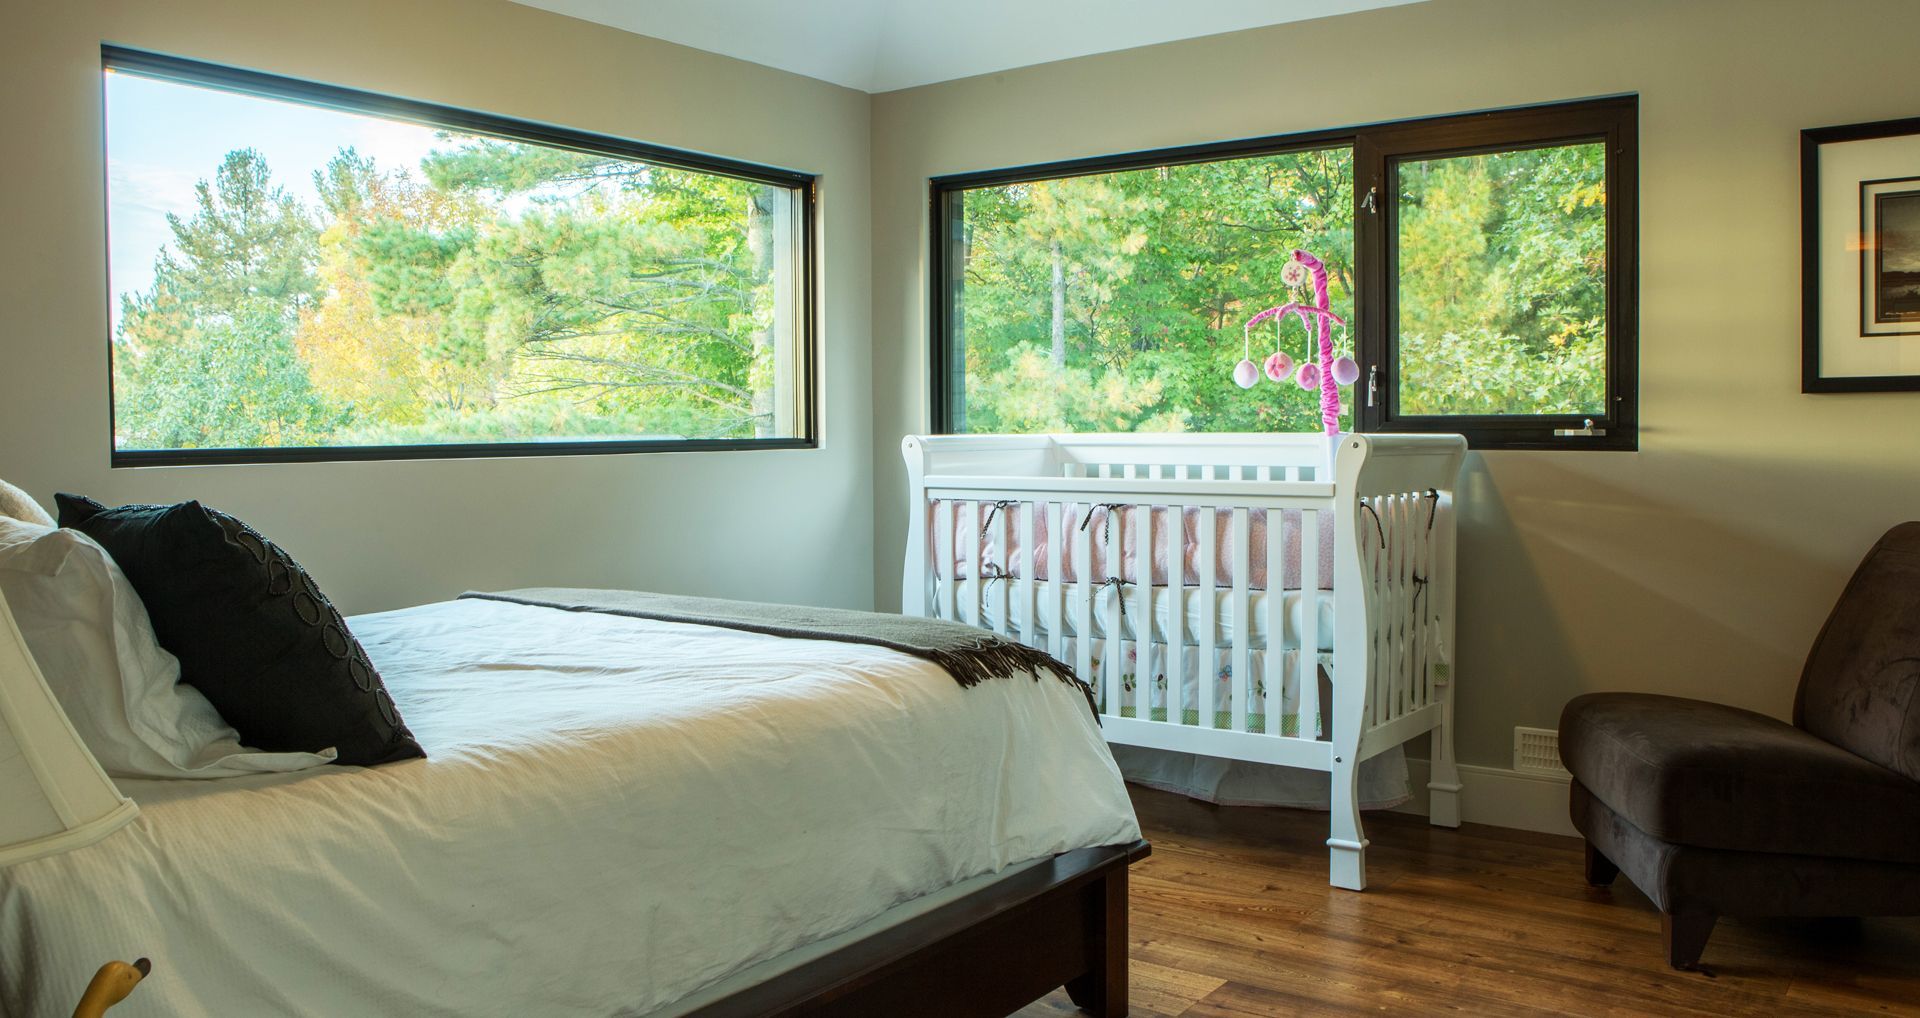 Family friendly custom cottage bedroom with bed, nursing chair and a baby's crib.